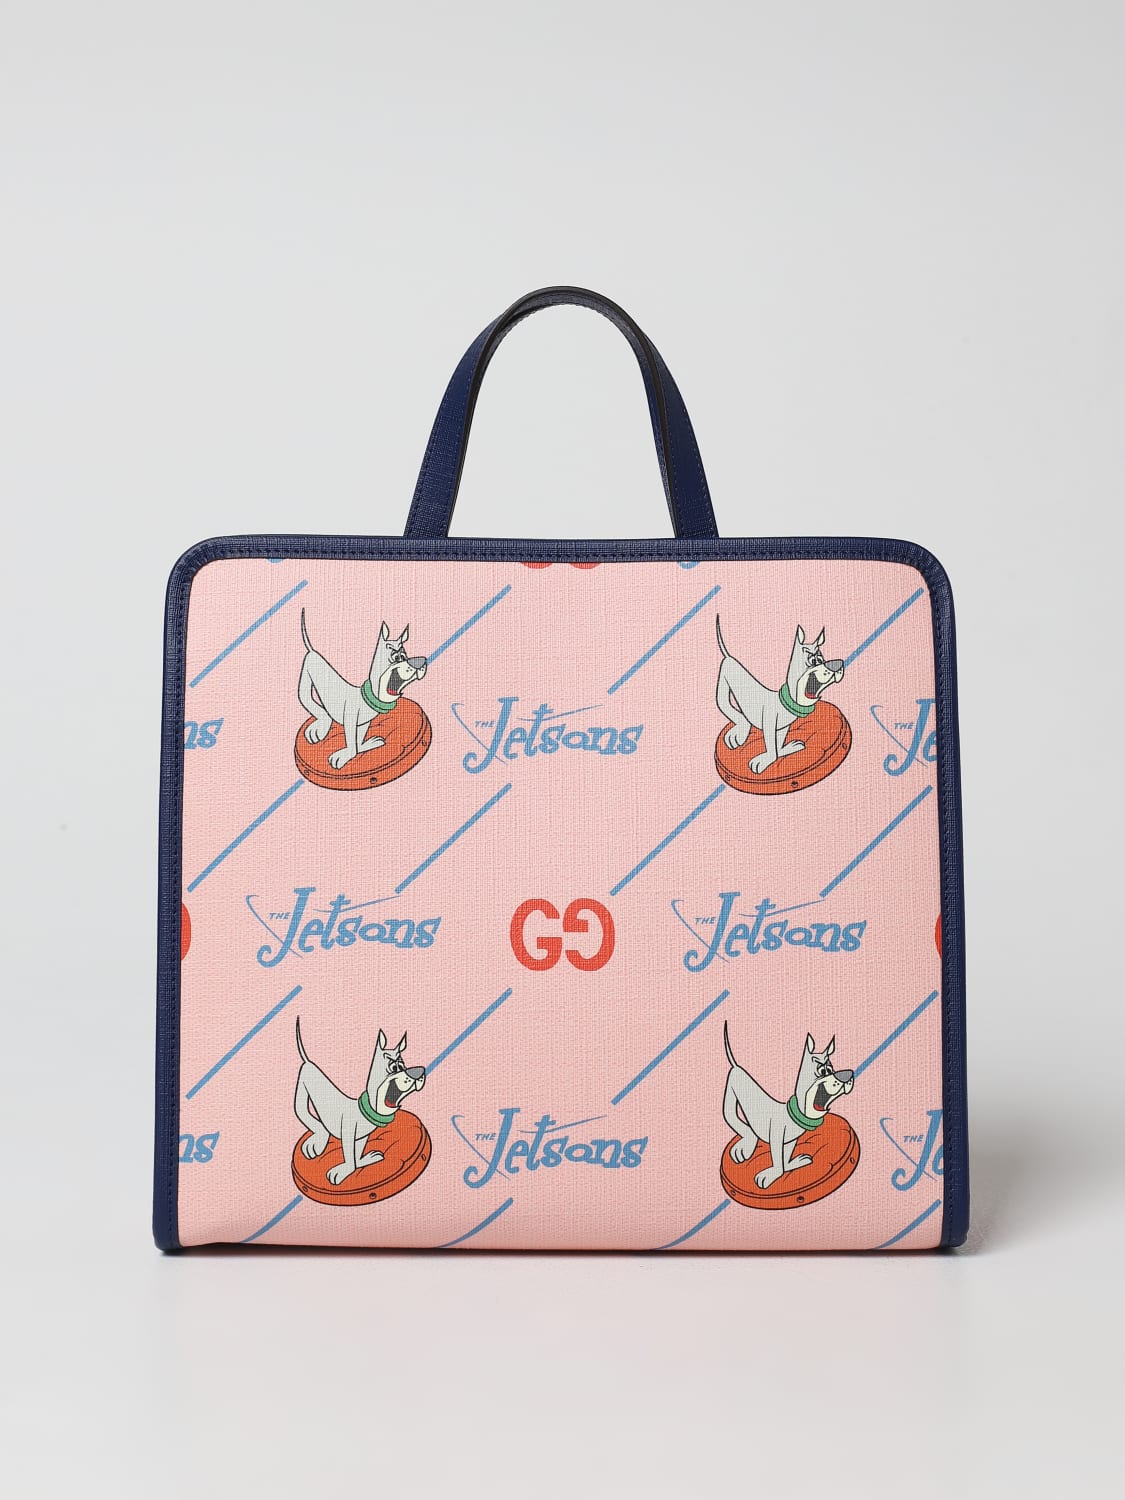 GUCCI: The Jetsons© x bag in coated cotton with all-over print - Pink